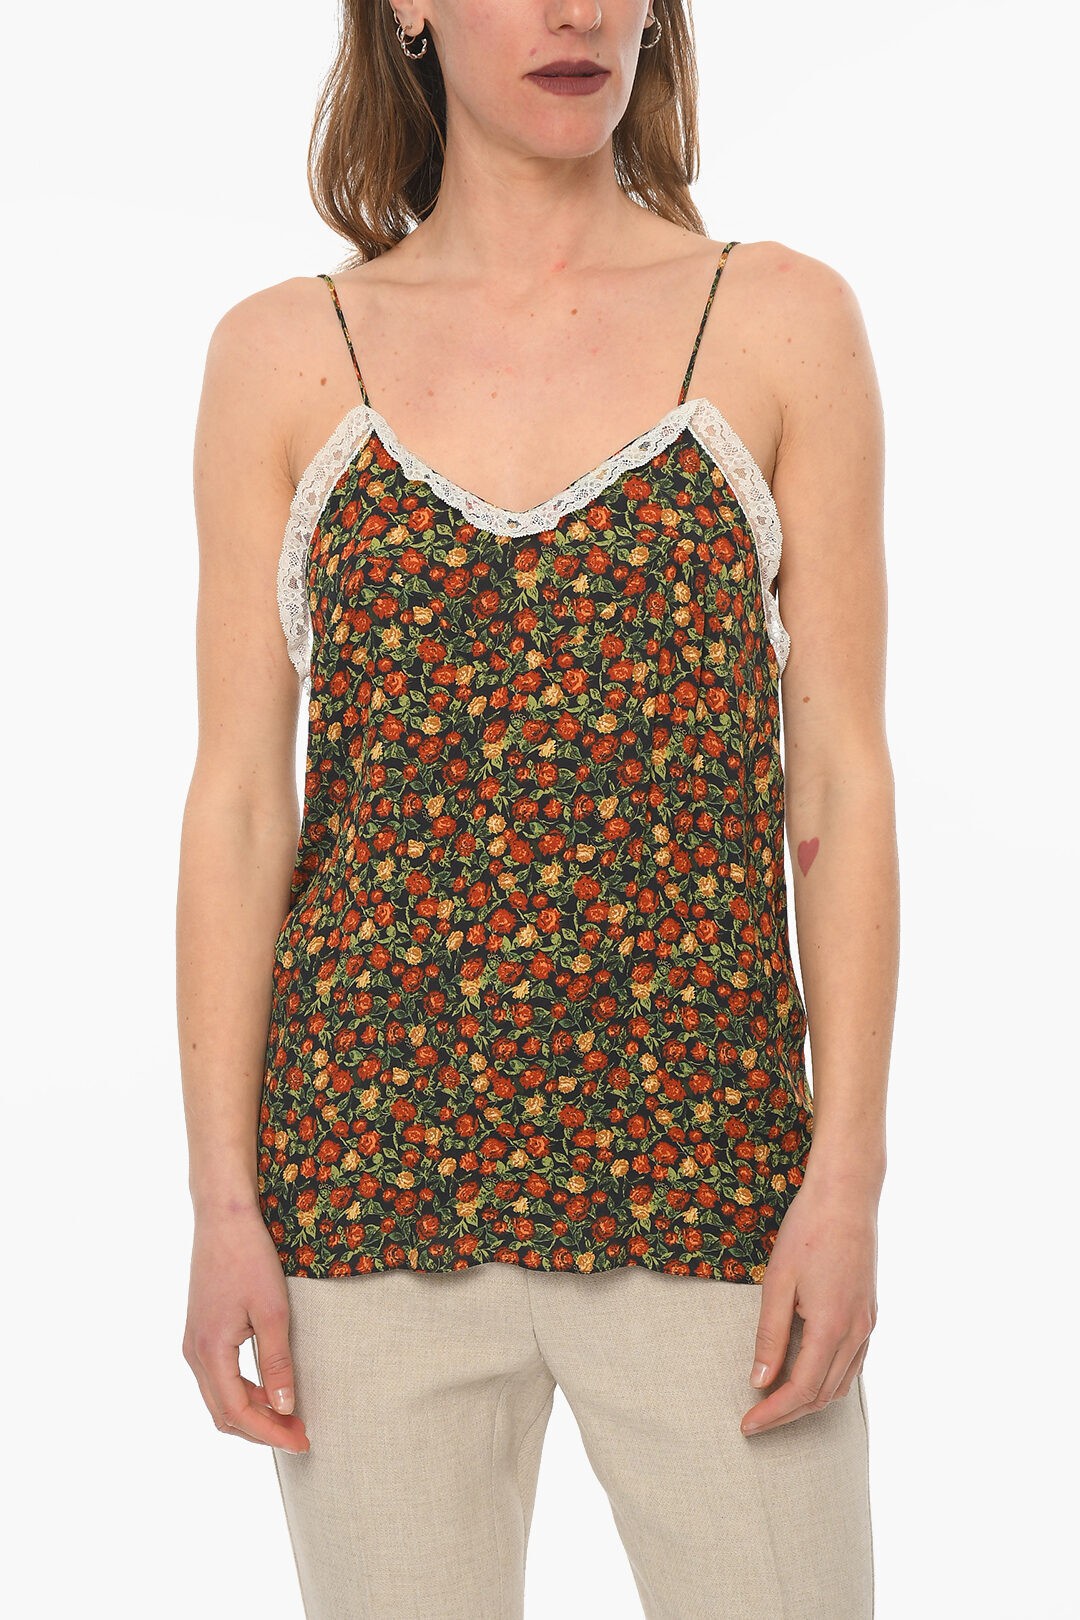 GUCCI グッチ Multicolor トップス 642451ZAFLP H 1096 レディース TANK TOP WITH LACE TRIMS AND FLORAL PRINT ALLOVER  dk